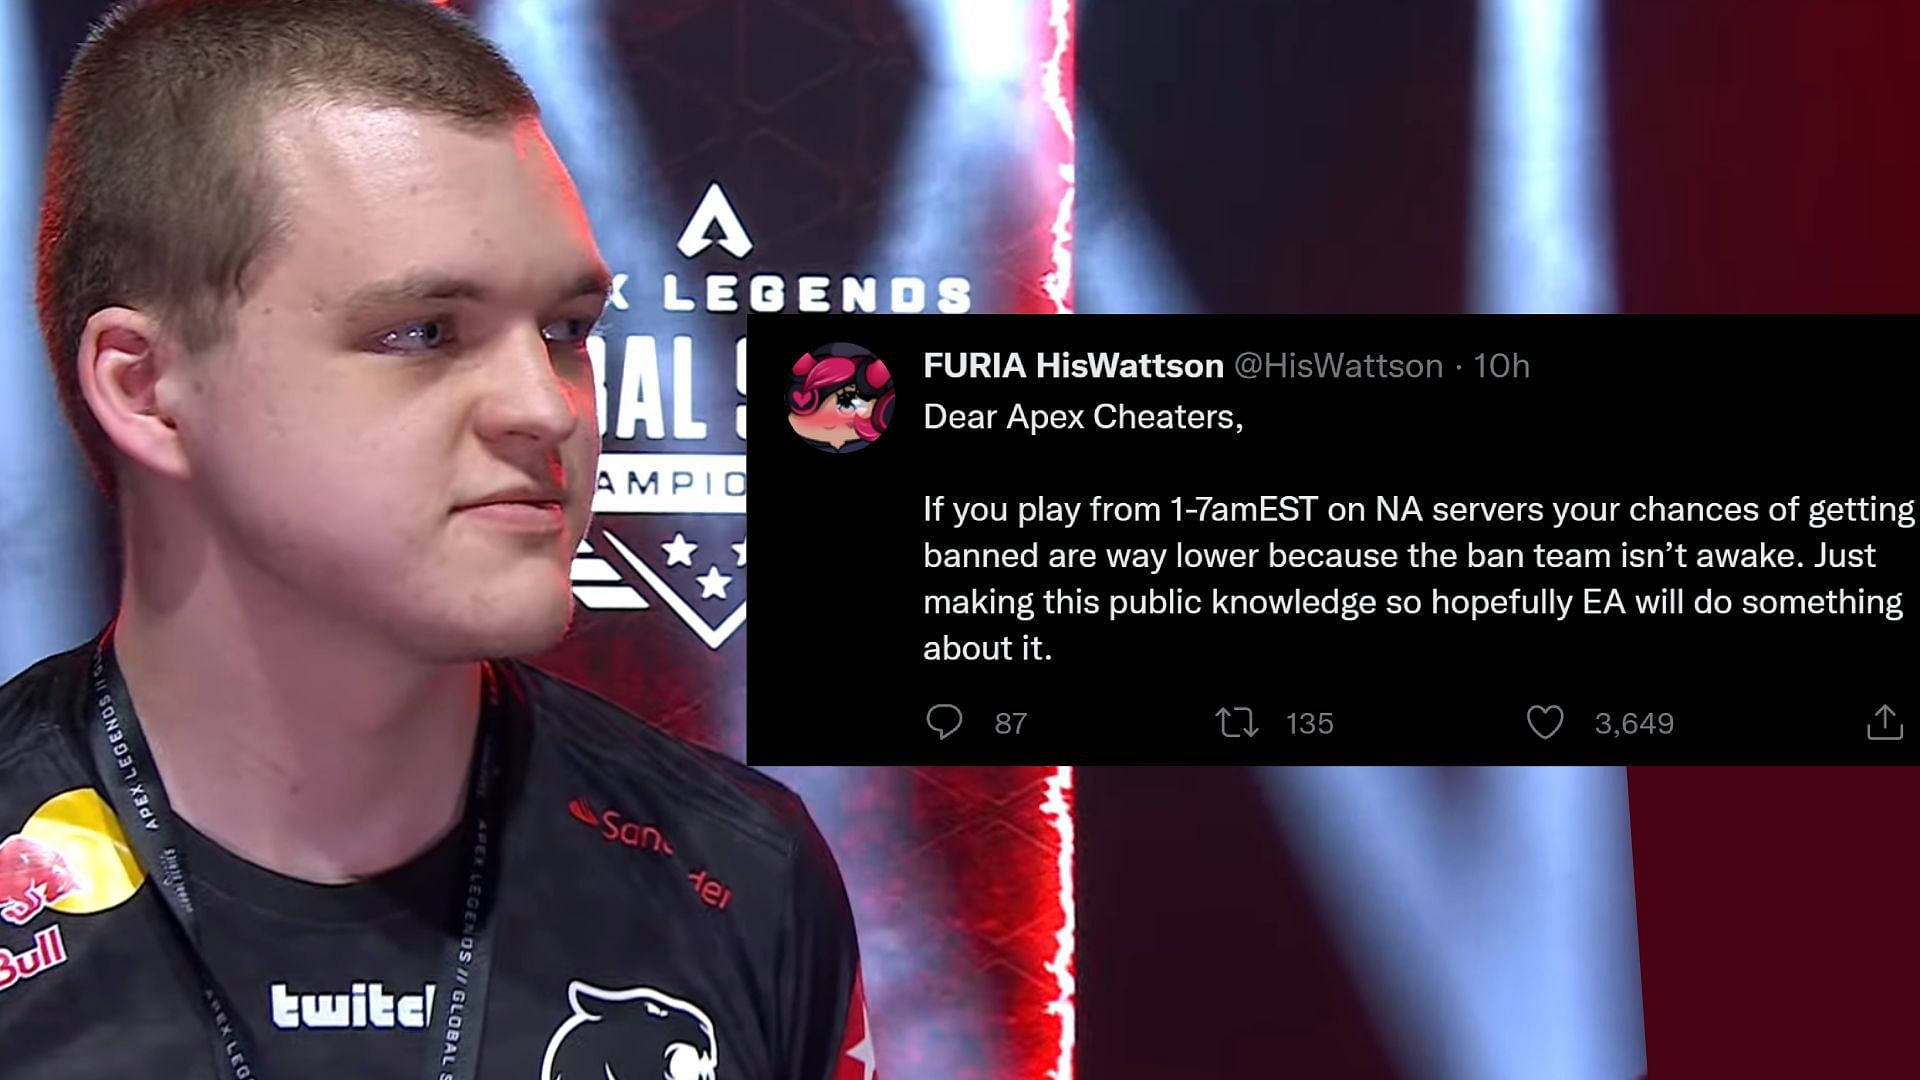 FURIA HisWattson on X: 5. Play Overwatch This game is cracked for